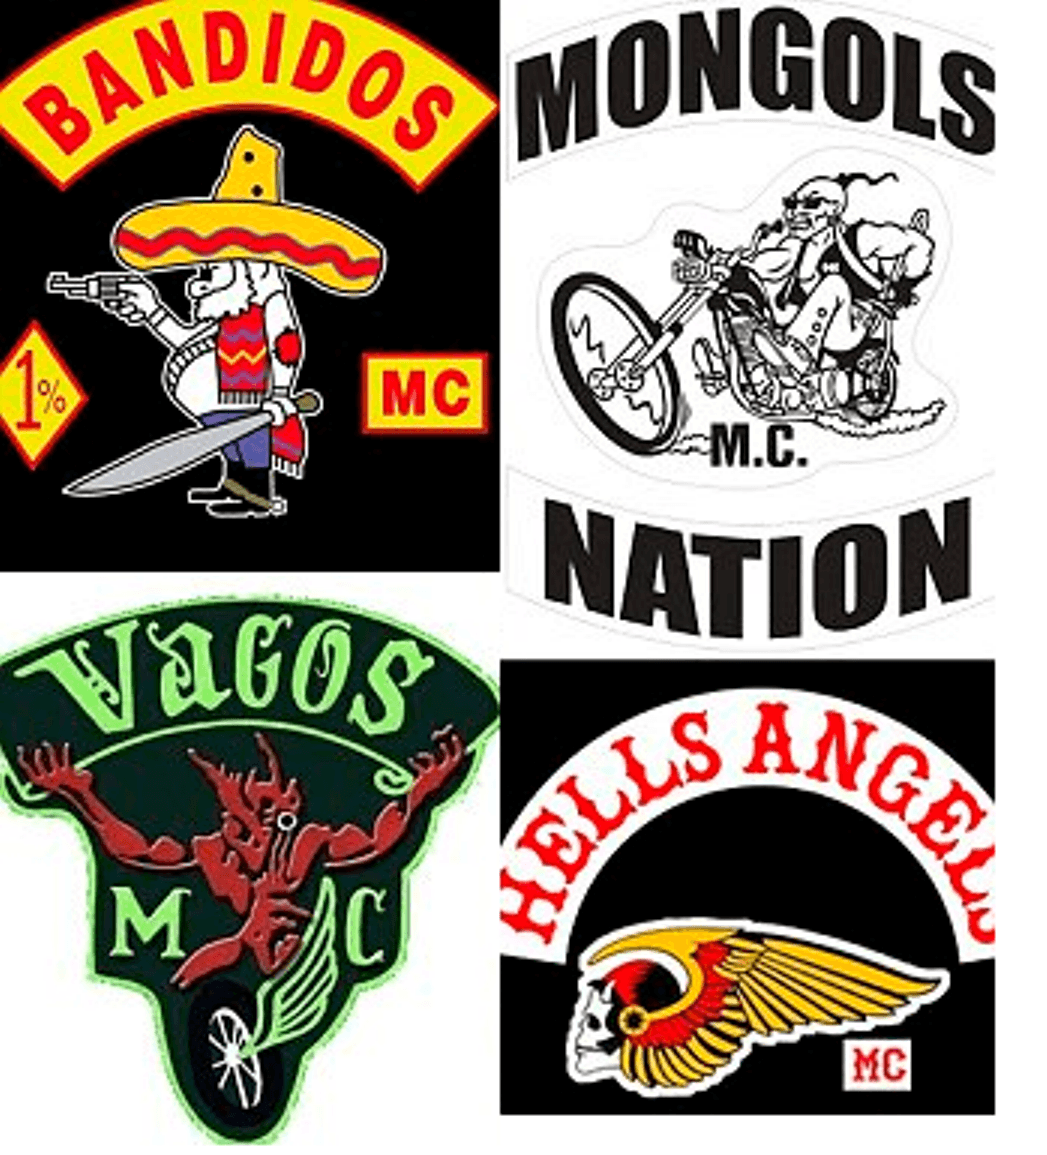 Motorcycle Gang Logo - Feds Go After Violent Motorcycle Gangs by Claiming Rights to Their ...